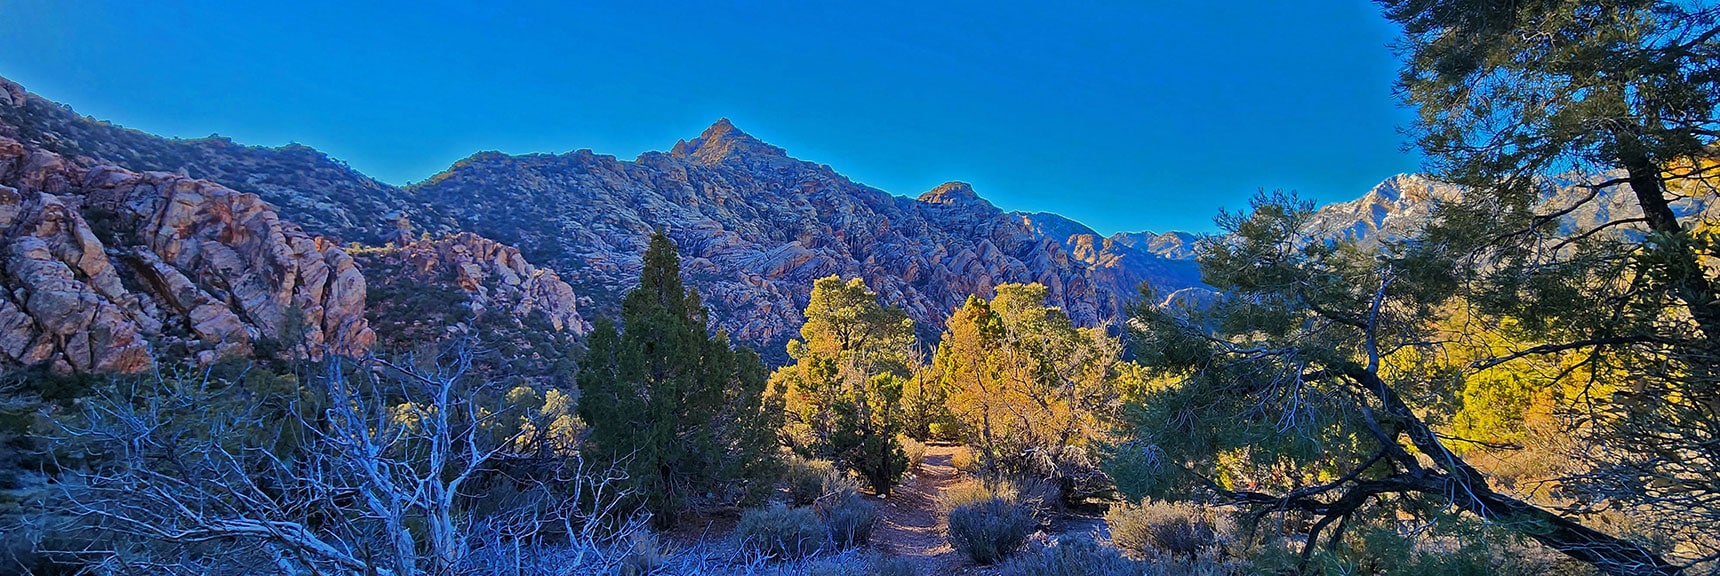 NE White Rock Mt Pine Forest Receives First Light | White Rock Mountain Loop Trail | Red Rock Canyon, Nevada